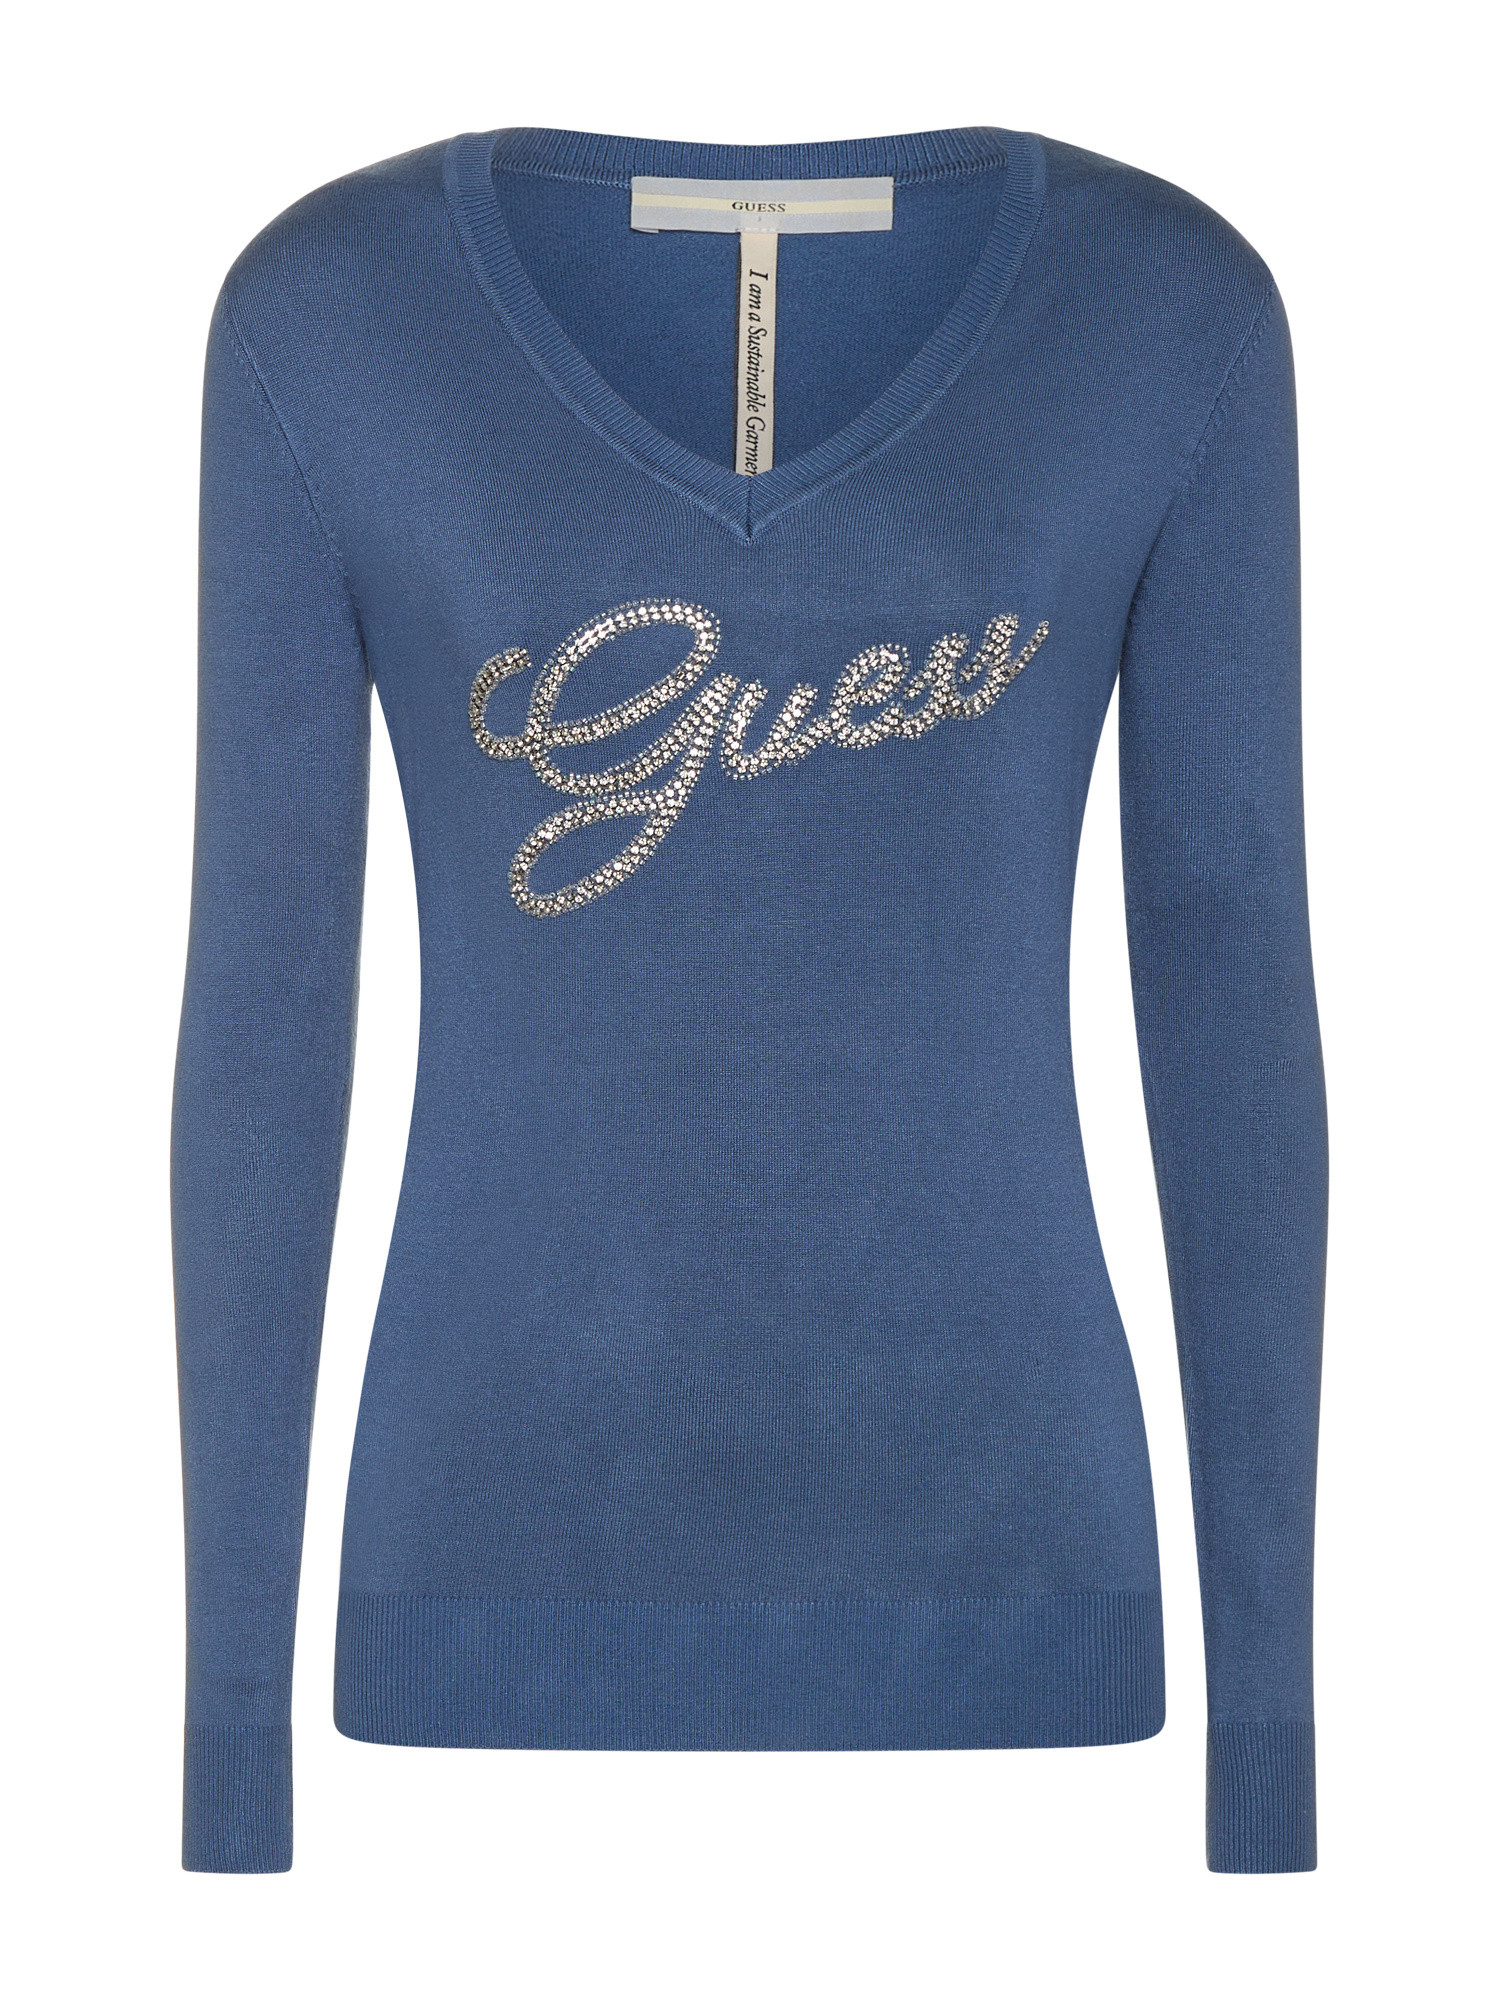 Guess - T-shirt with logo, Aviation Blue, large image number 0